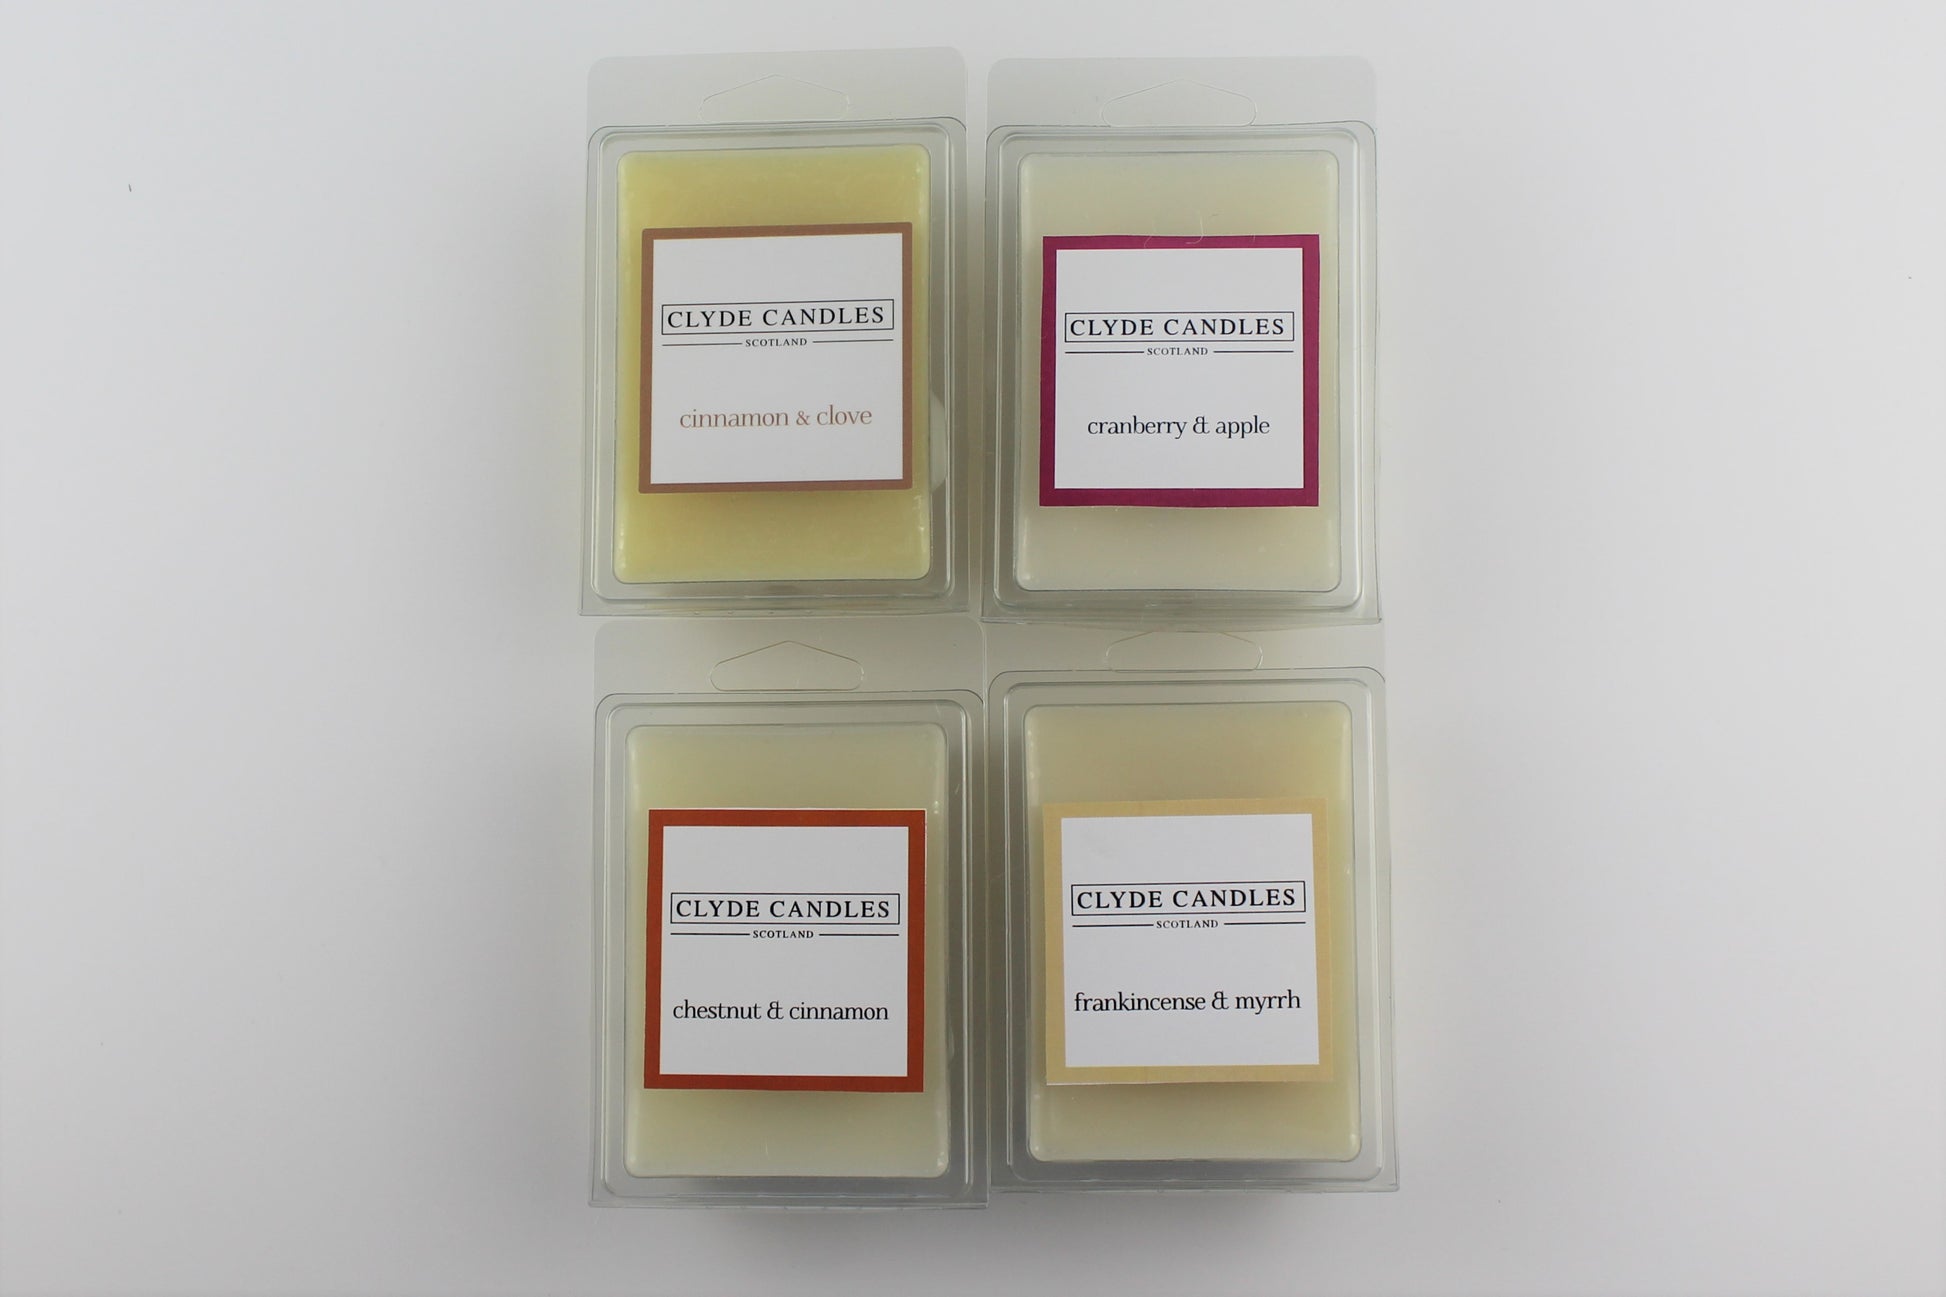 four wax melt gift set, clyde candles, scottish candles, gifts, natural soy wax, christmas gifts 